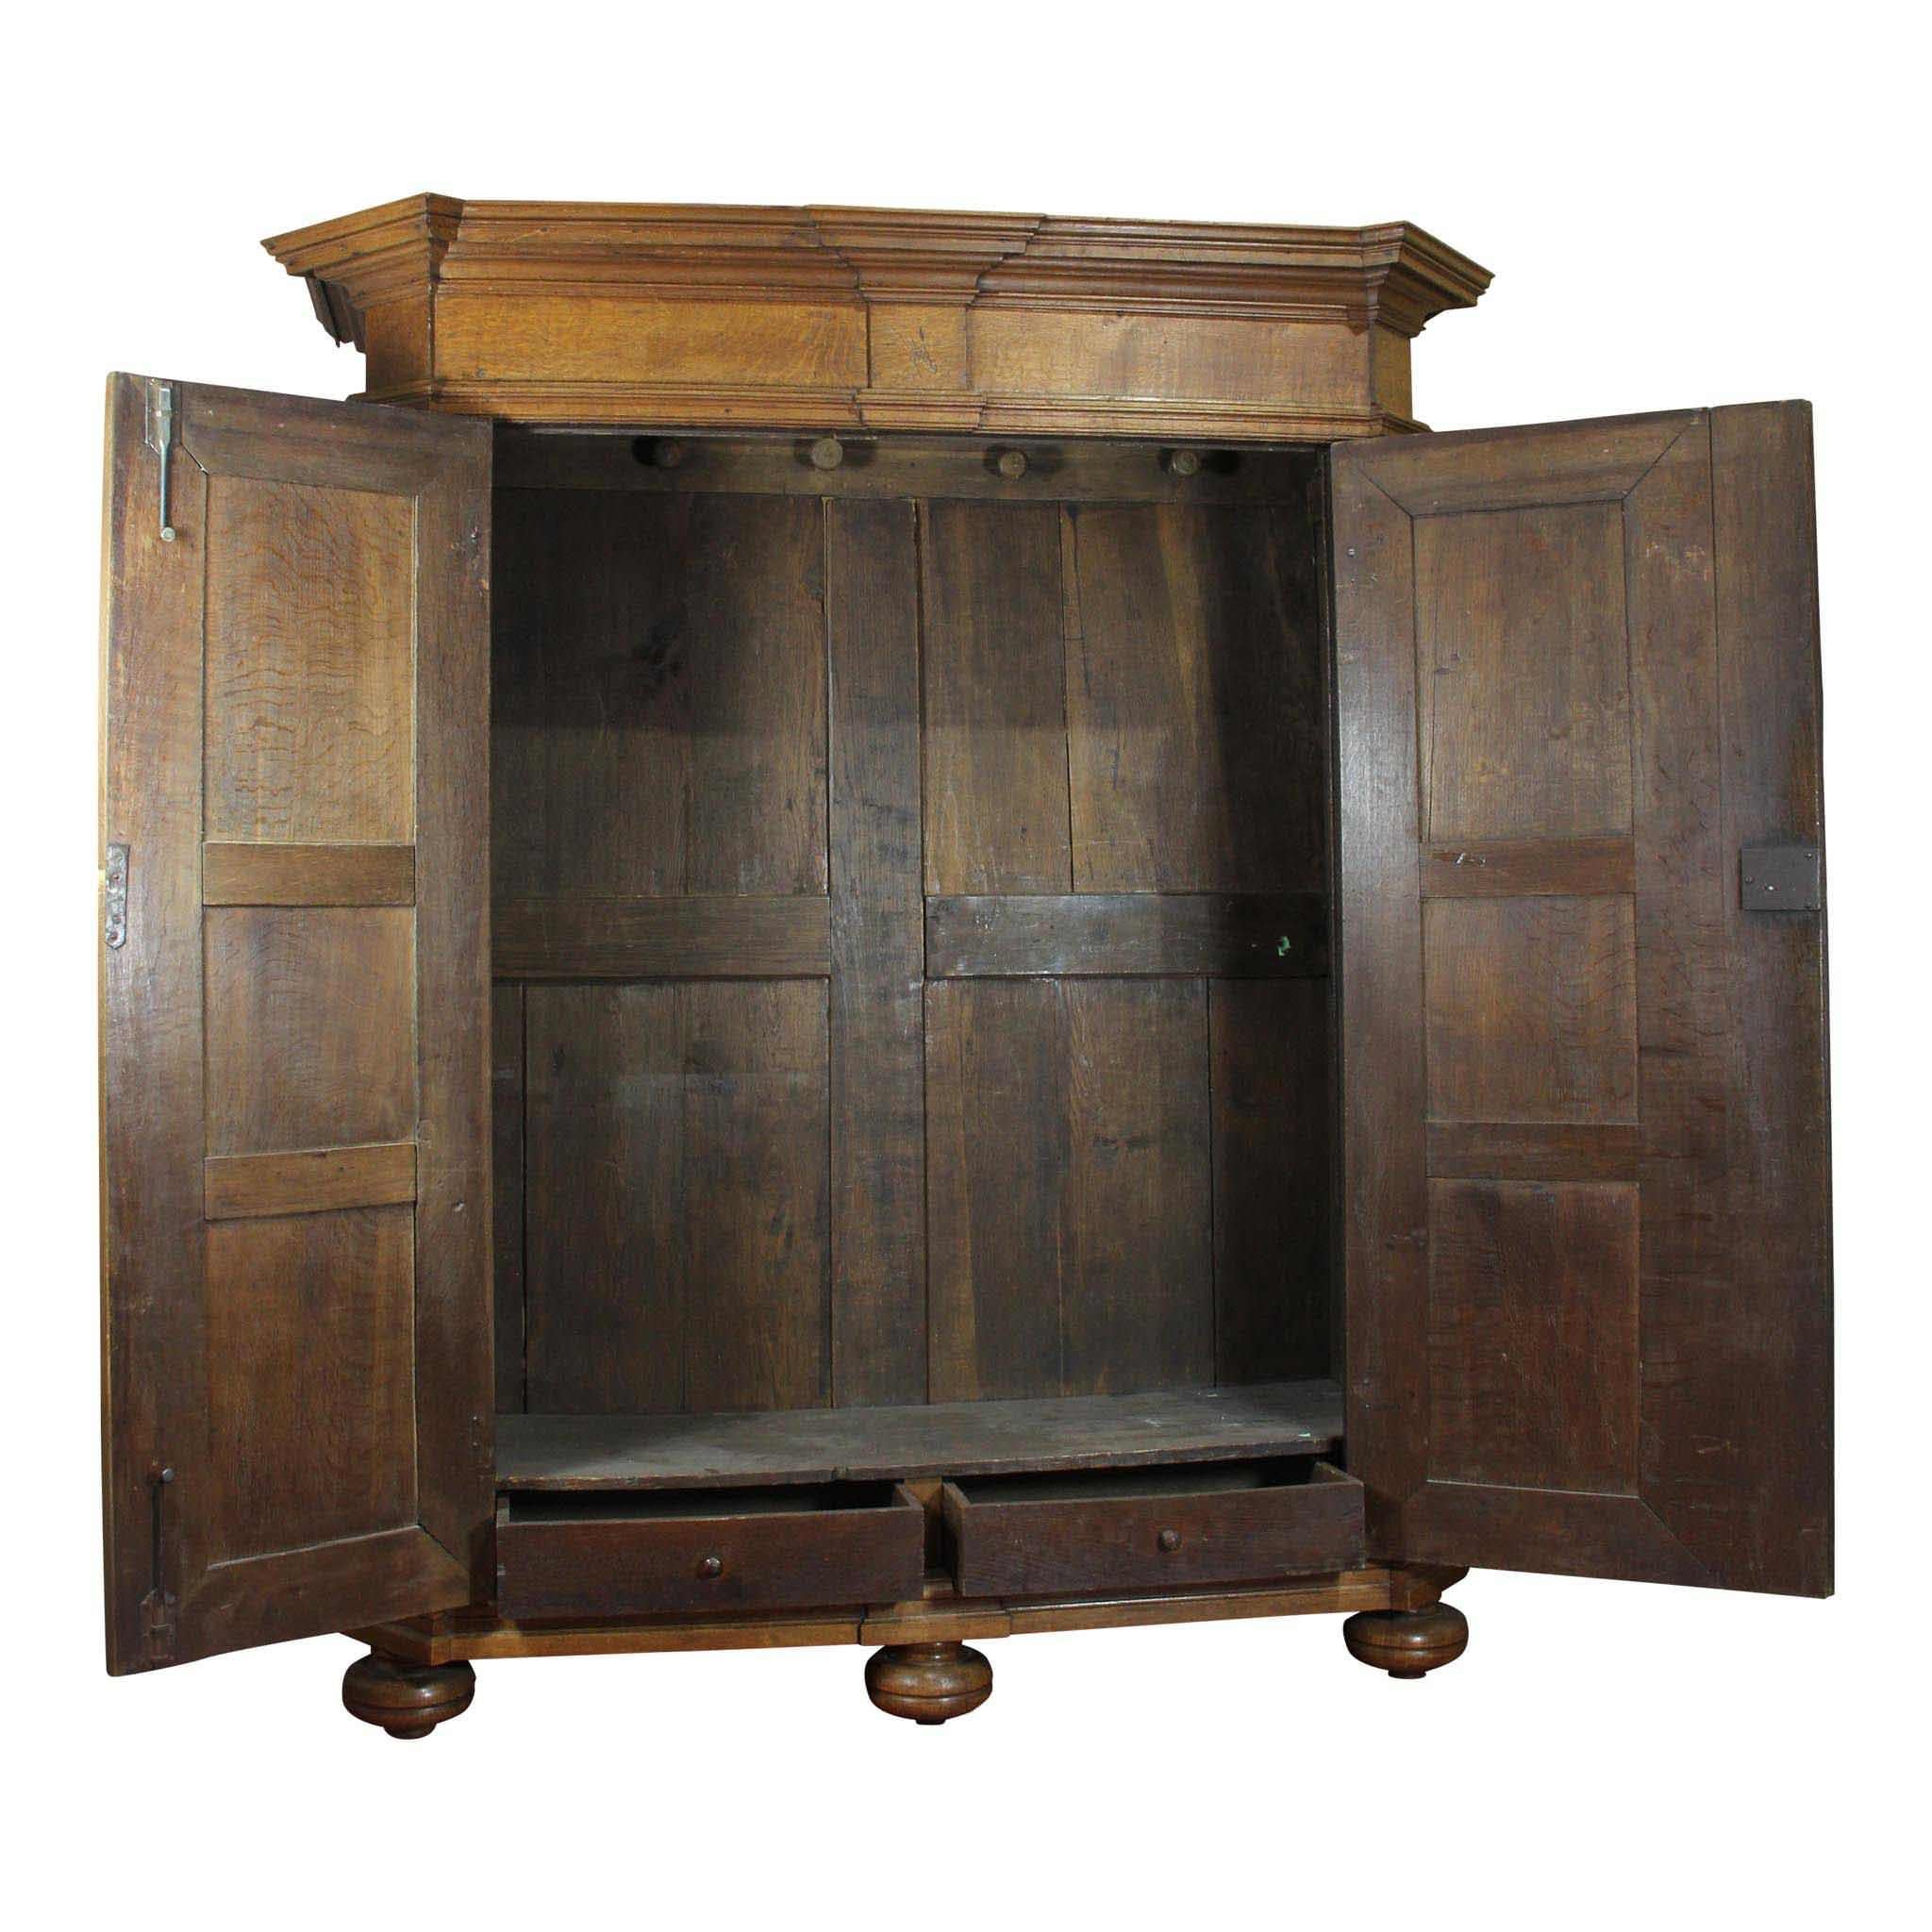 Crafted in Liege, Belgium, the beauty of solid, quarter sawn oak is prominently displayed on the raised panels of the sides and on the doors of this large armoire. Small carvings of pineapple encircled by C scrolls with acanthus leaves adorn the